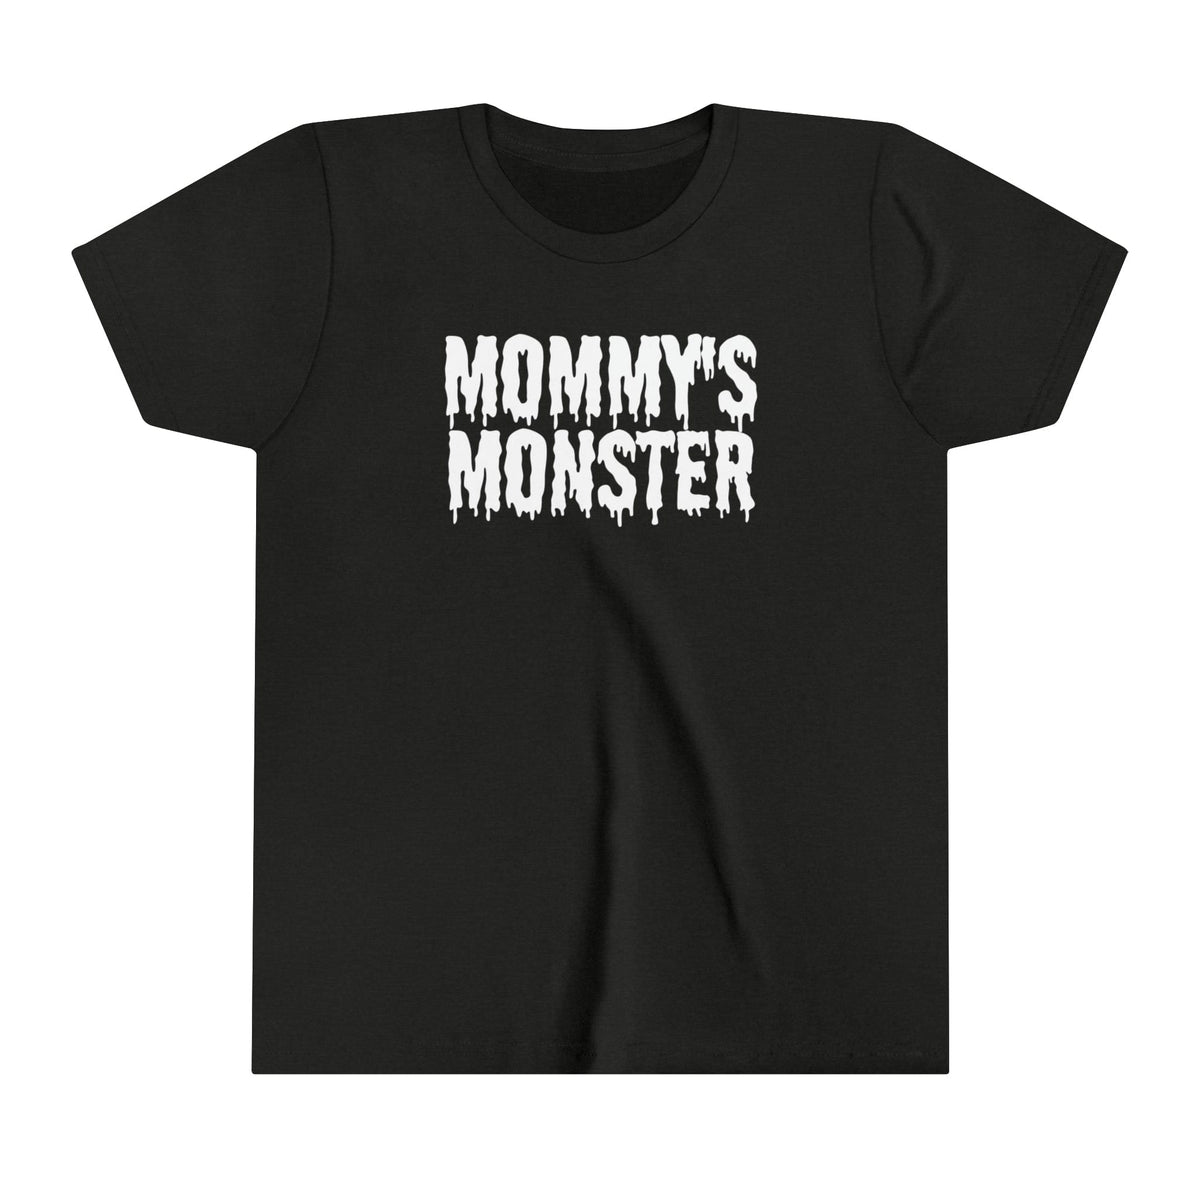 Kids clothes Black Heather / S Mommy's Monster Children's Graphic Tee